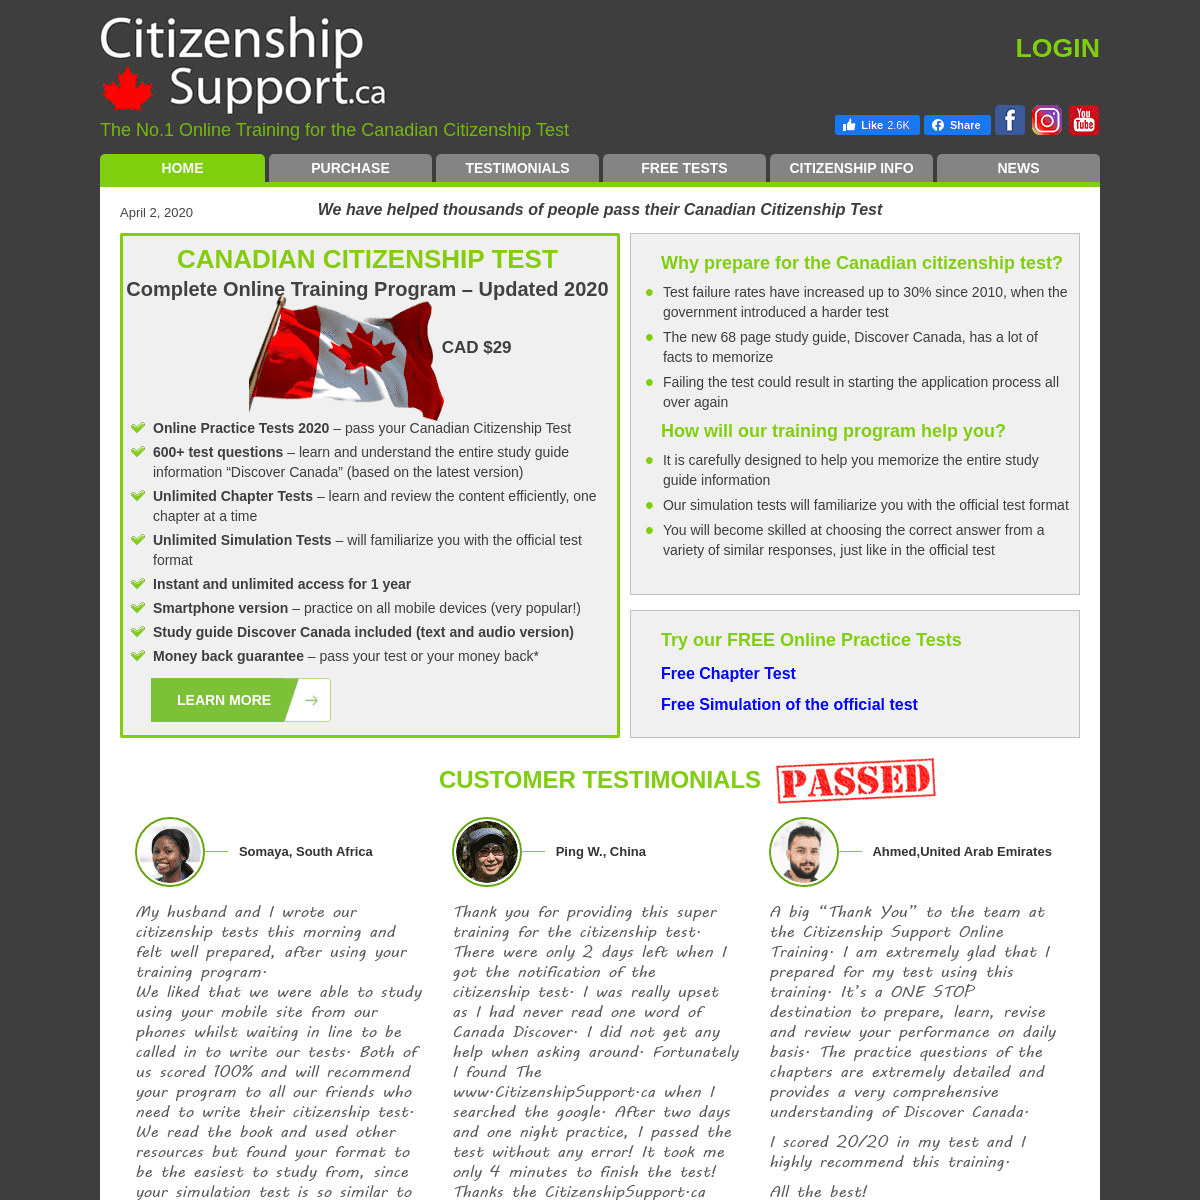 A complete backup of citizenshipsupport.ca